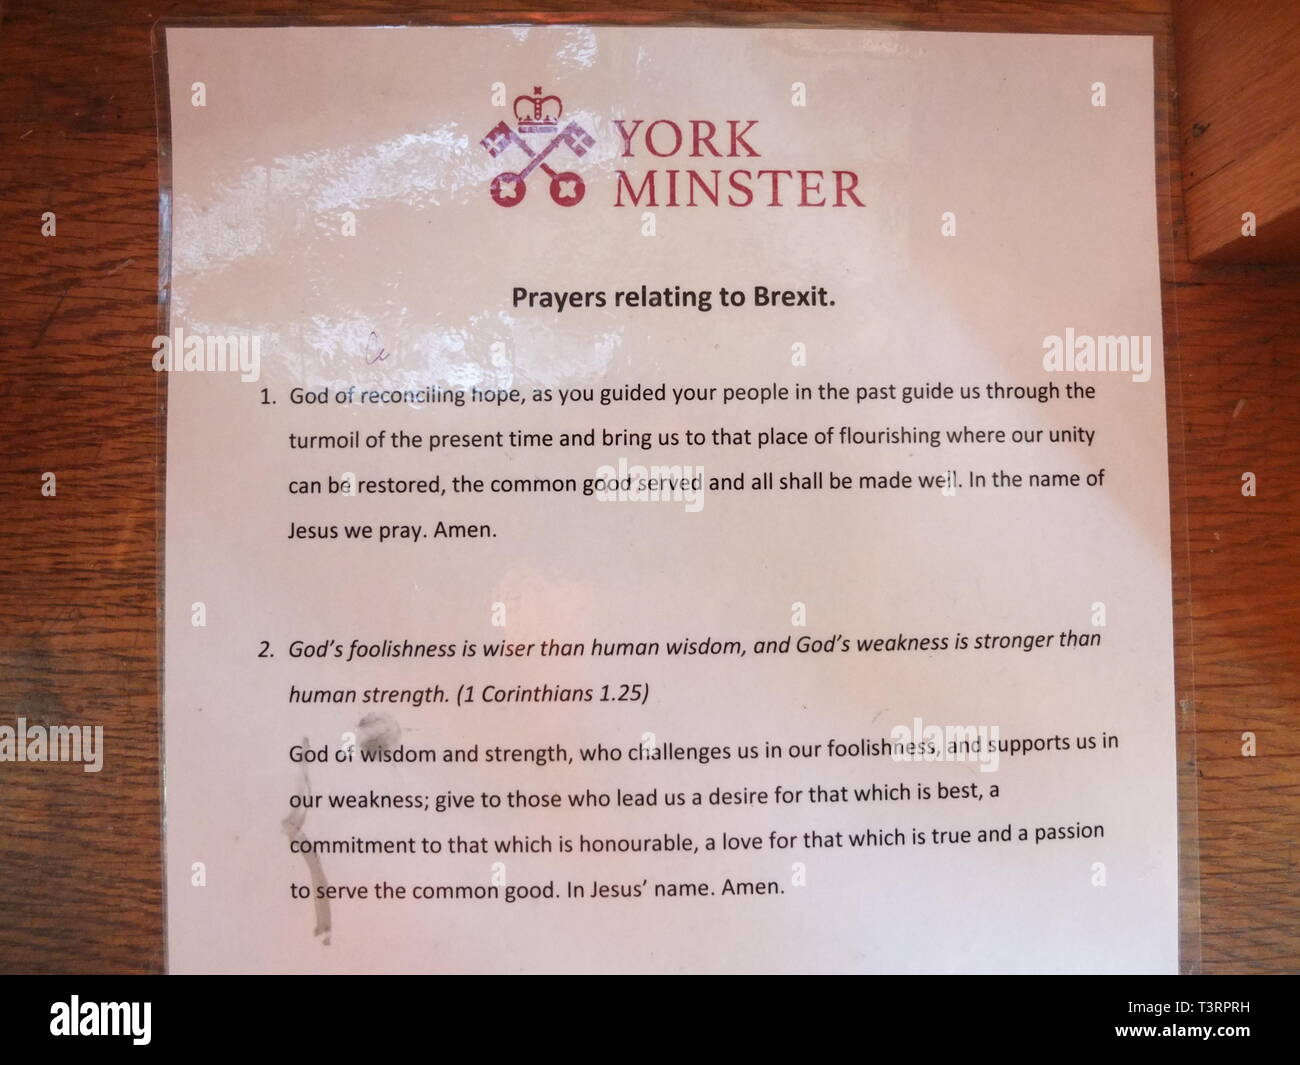 A selection of Prayers relating to Brexit on laminated card issued for visitors to York Minster UK. Brexit and religion. Stock Photo